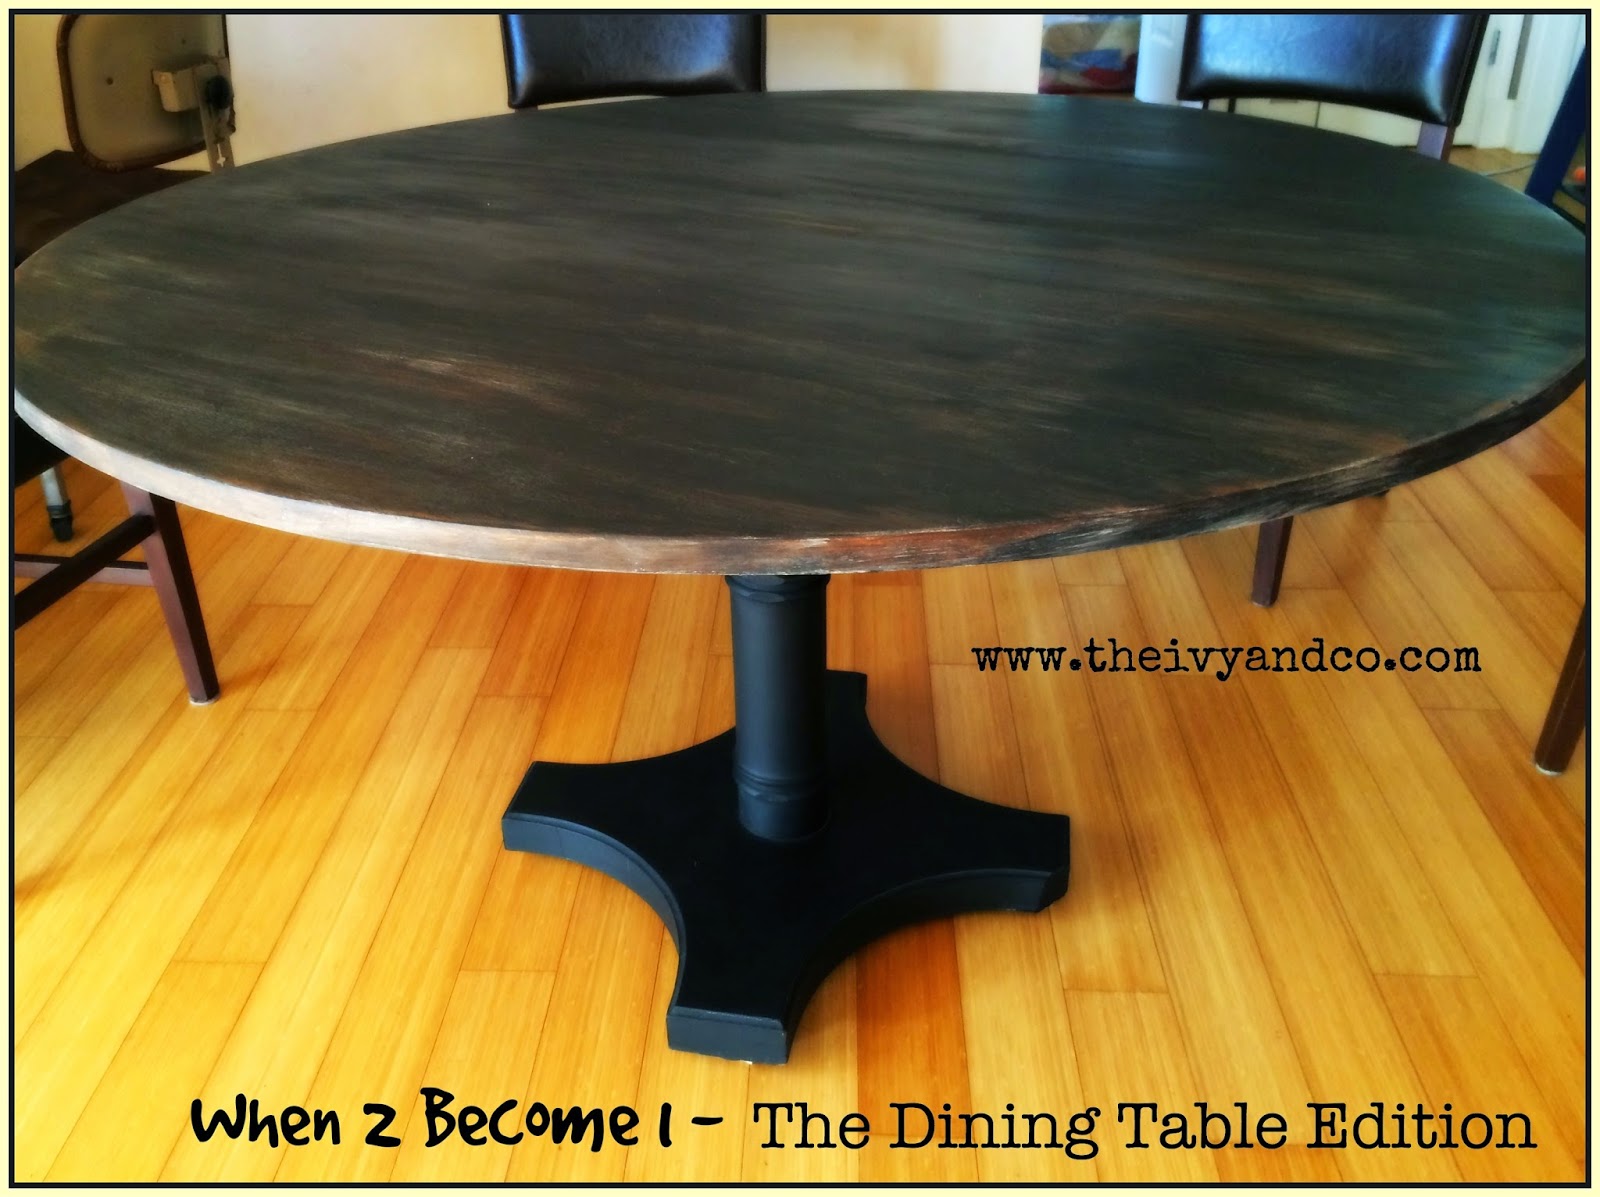 Black Chalk & Milk Paint Dining Table, Dream Table, Wood Dining Table, Table Conversion, Kauai Habitat for Humanity, Kauai Ross Dress for Less, Painting Your Kitchen Table